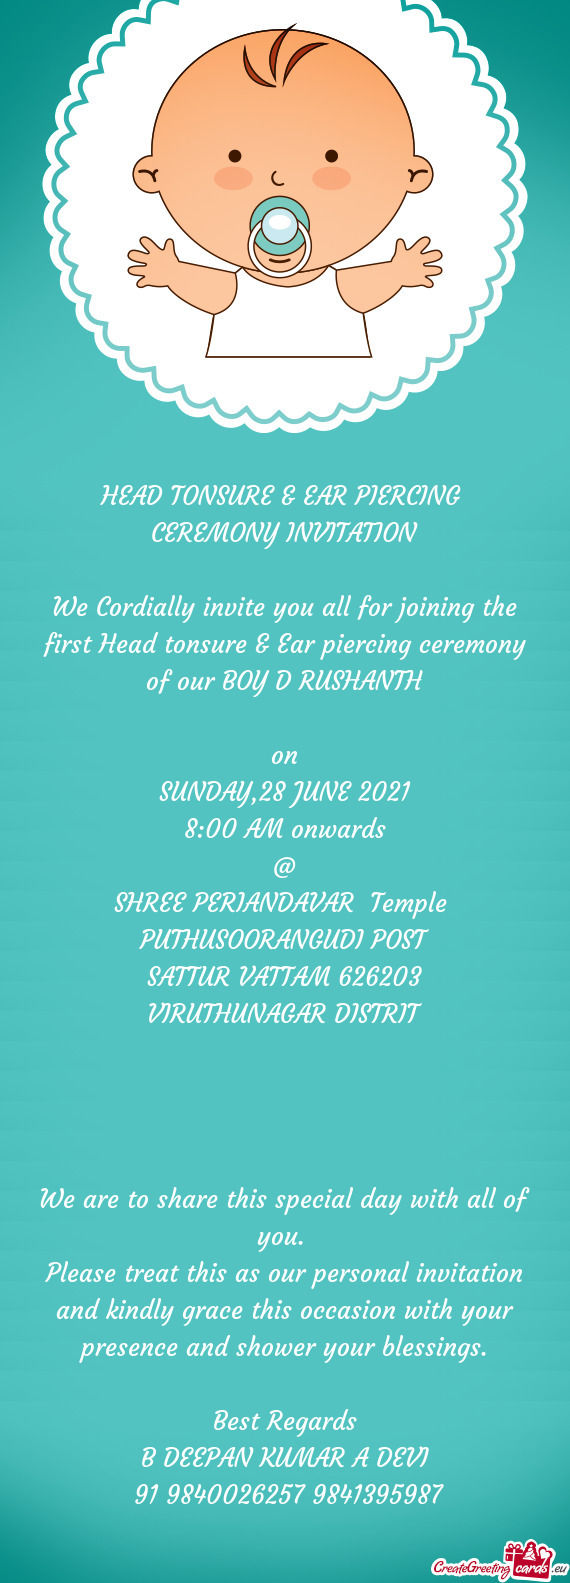 We Cordially invite you all for joining the first Head tonsure & Ear piercing ceremony of our BOY D